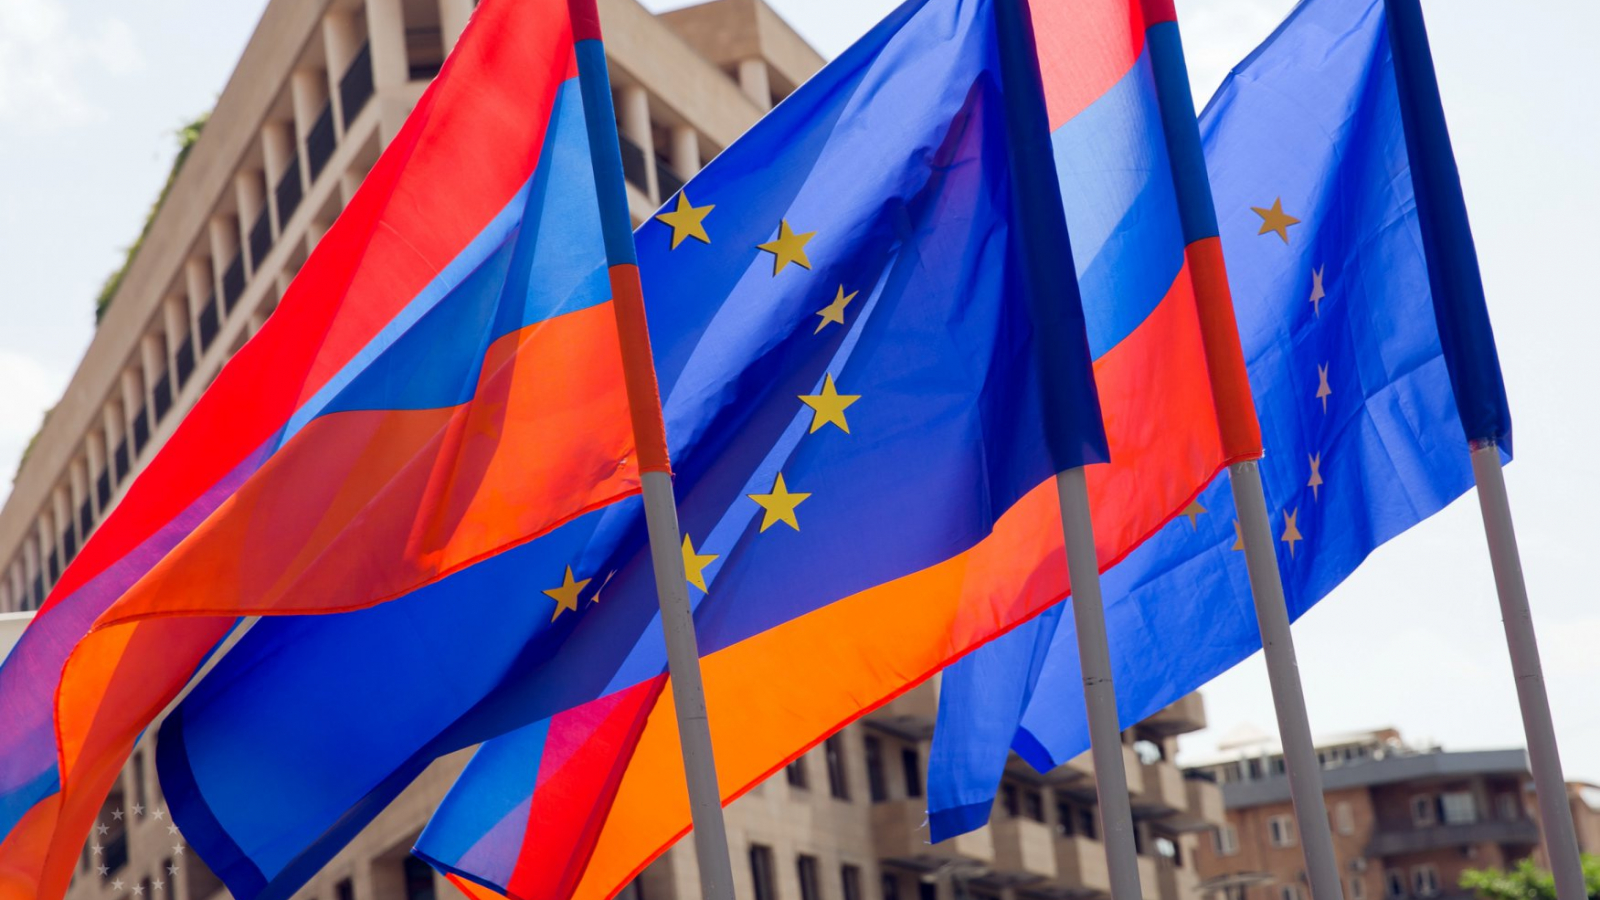 10th anniversary of the Eastern Partnership – a good opportunity to know what it means for Armenia